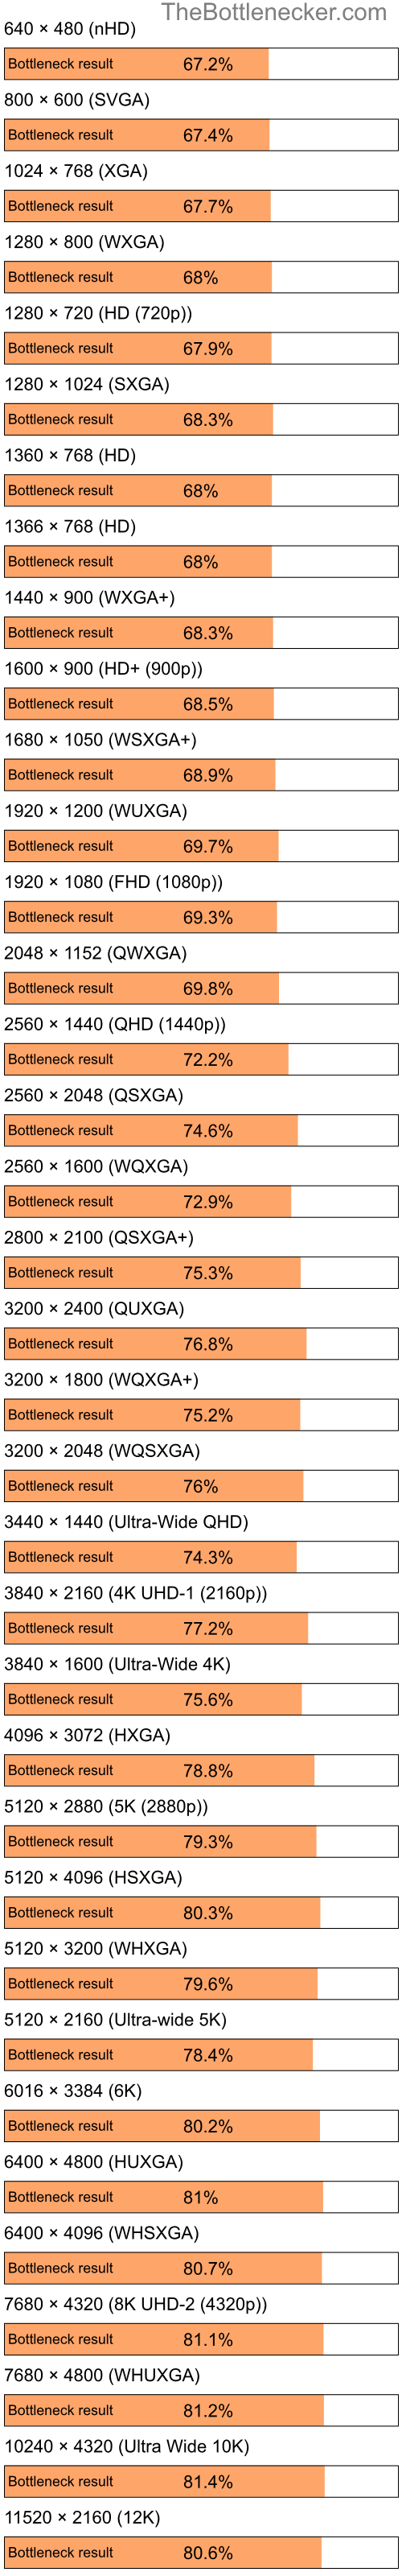 Bottleneck results by resolution for Intel Pentium 4 and AMD Mobility Radeon 4100 in7 Days to Die